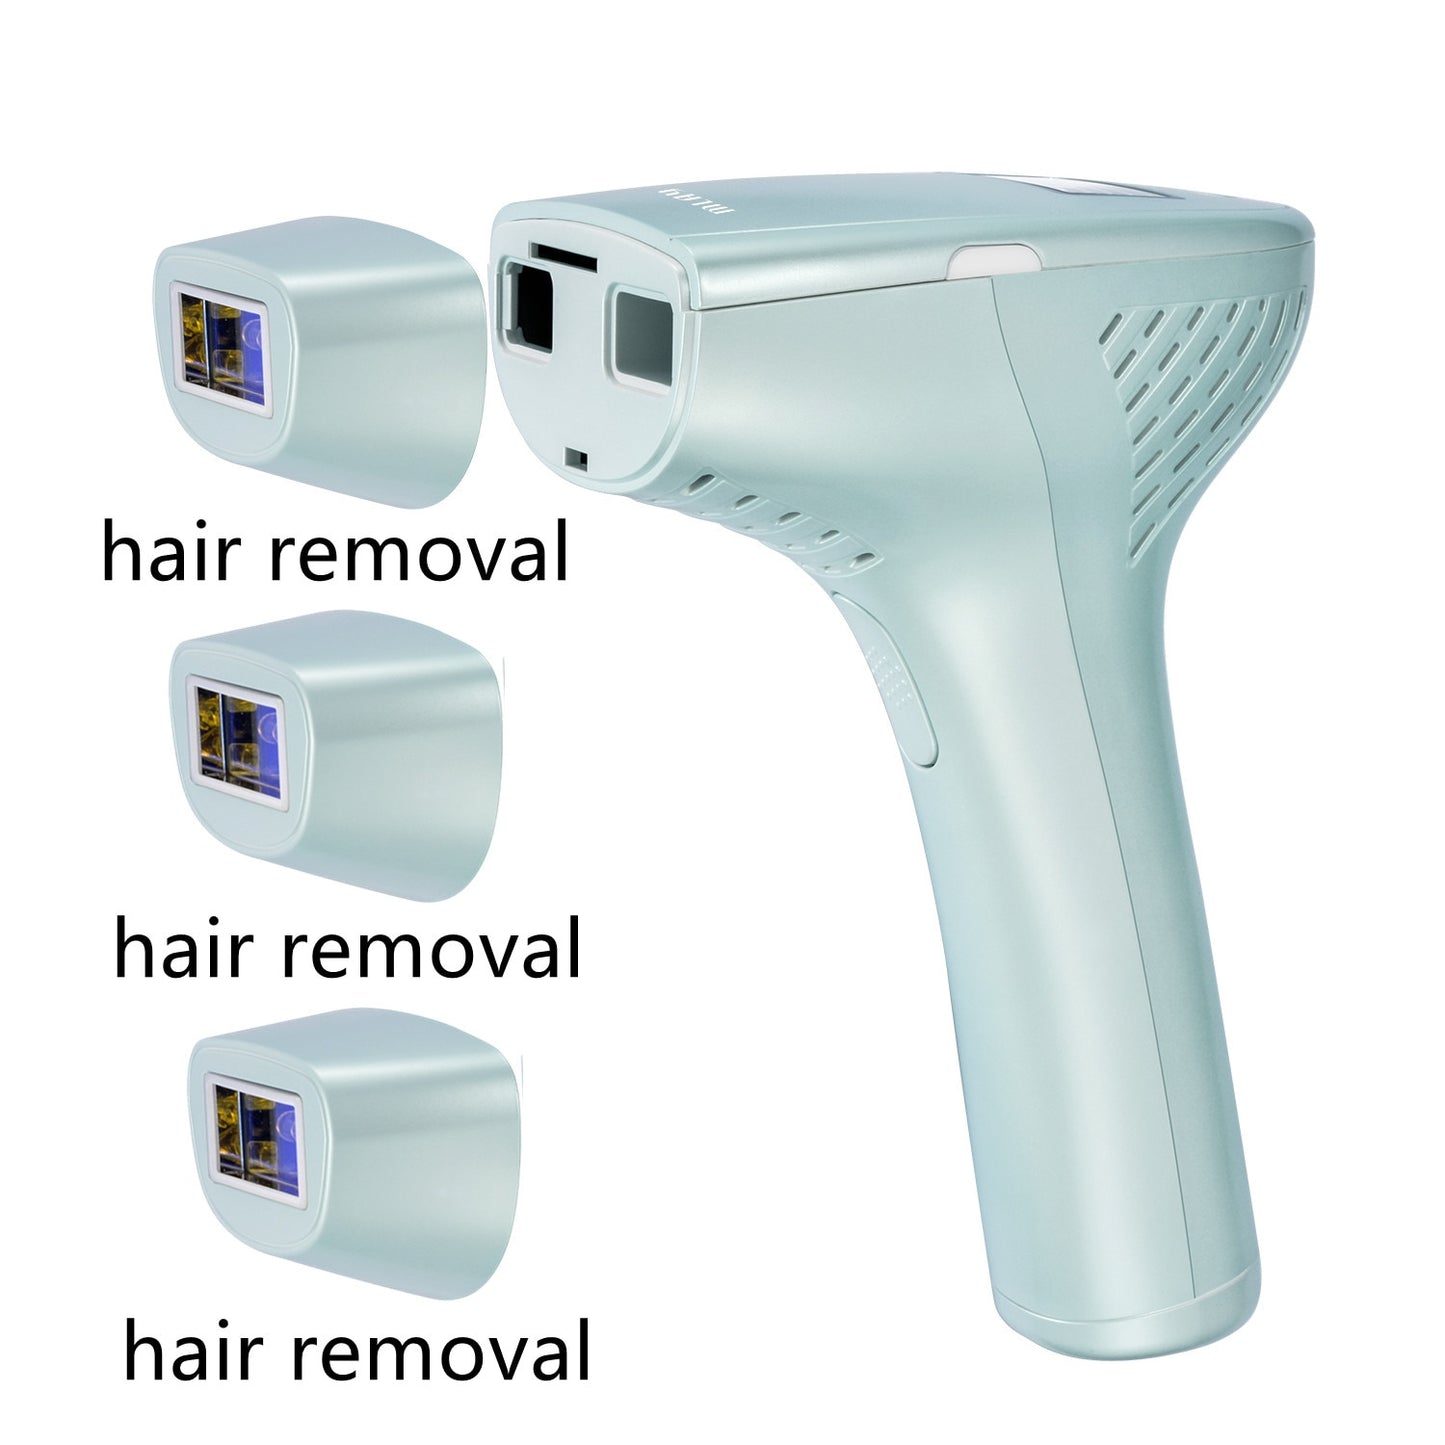 MLAY M3 device IPL laser hair removal machine Depilador household Epilator for women Wen Malay ميلسيا delivery quickly